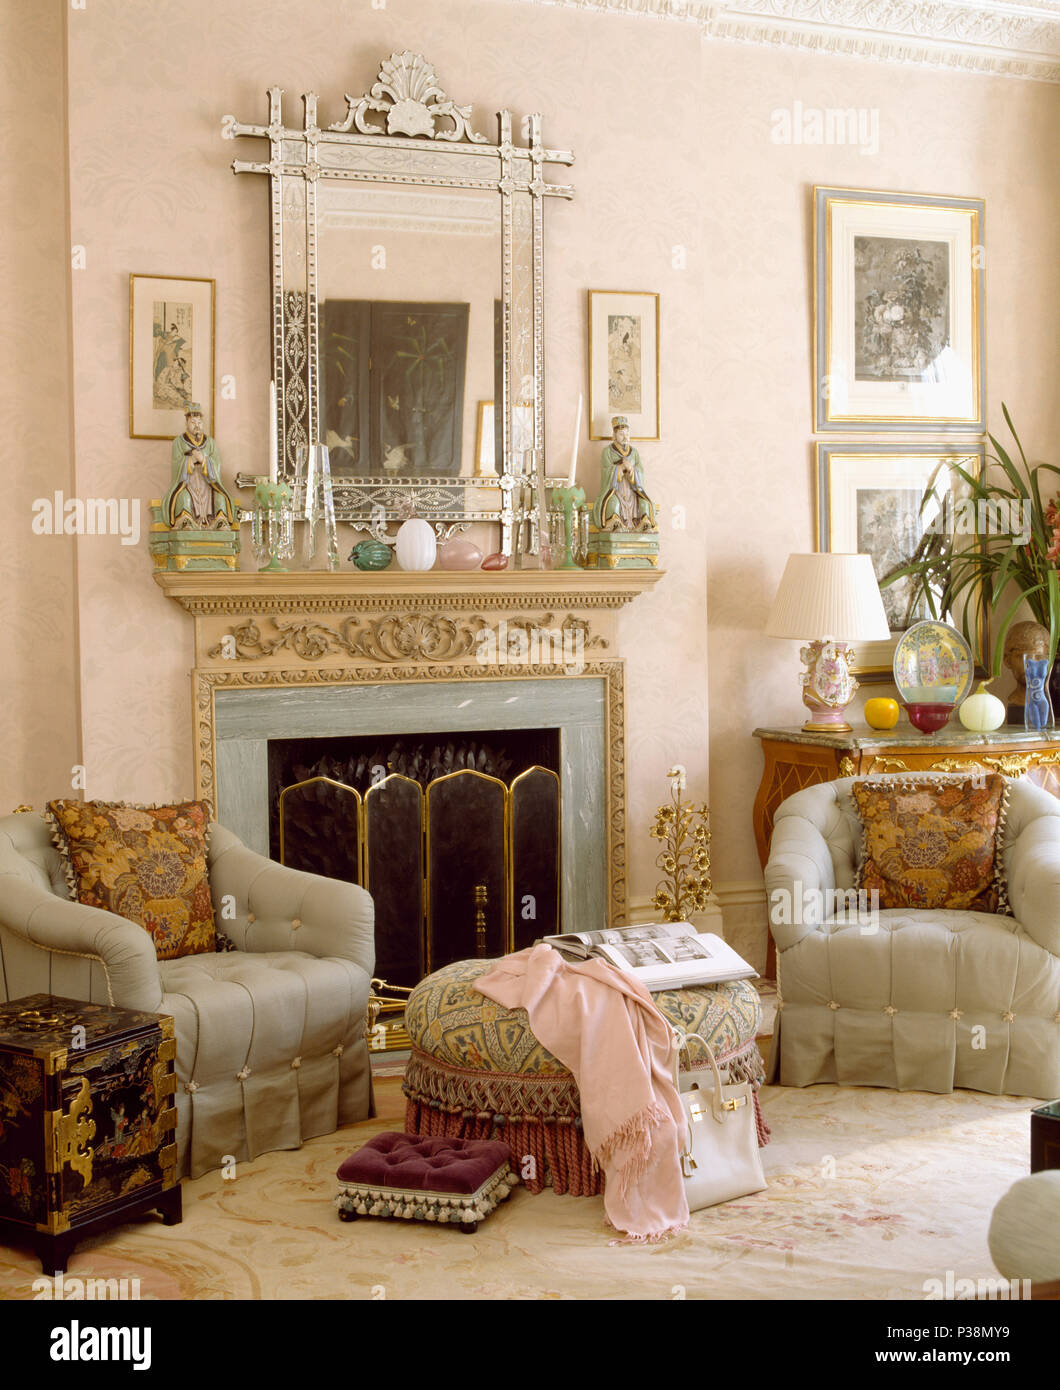 Venetian glass mirror above fireplace with brass firescreen in pale pink living room with grey armchairs Stock Photo